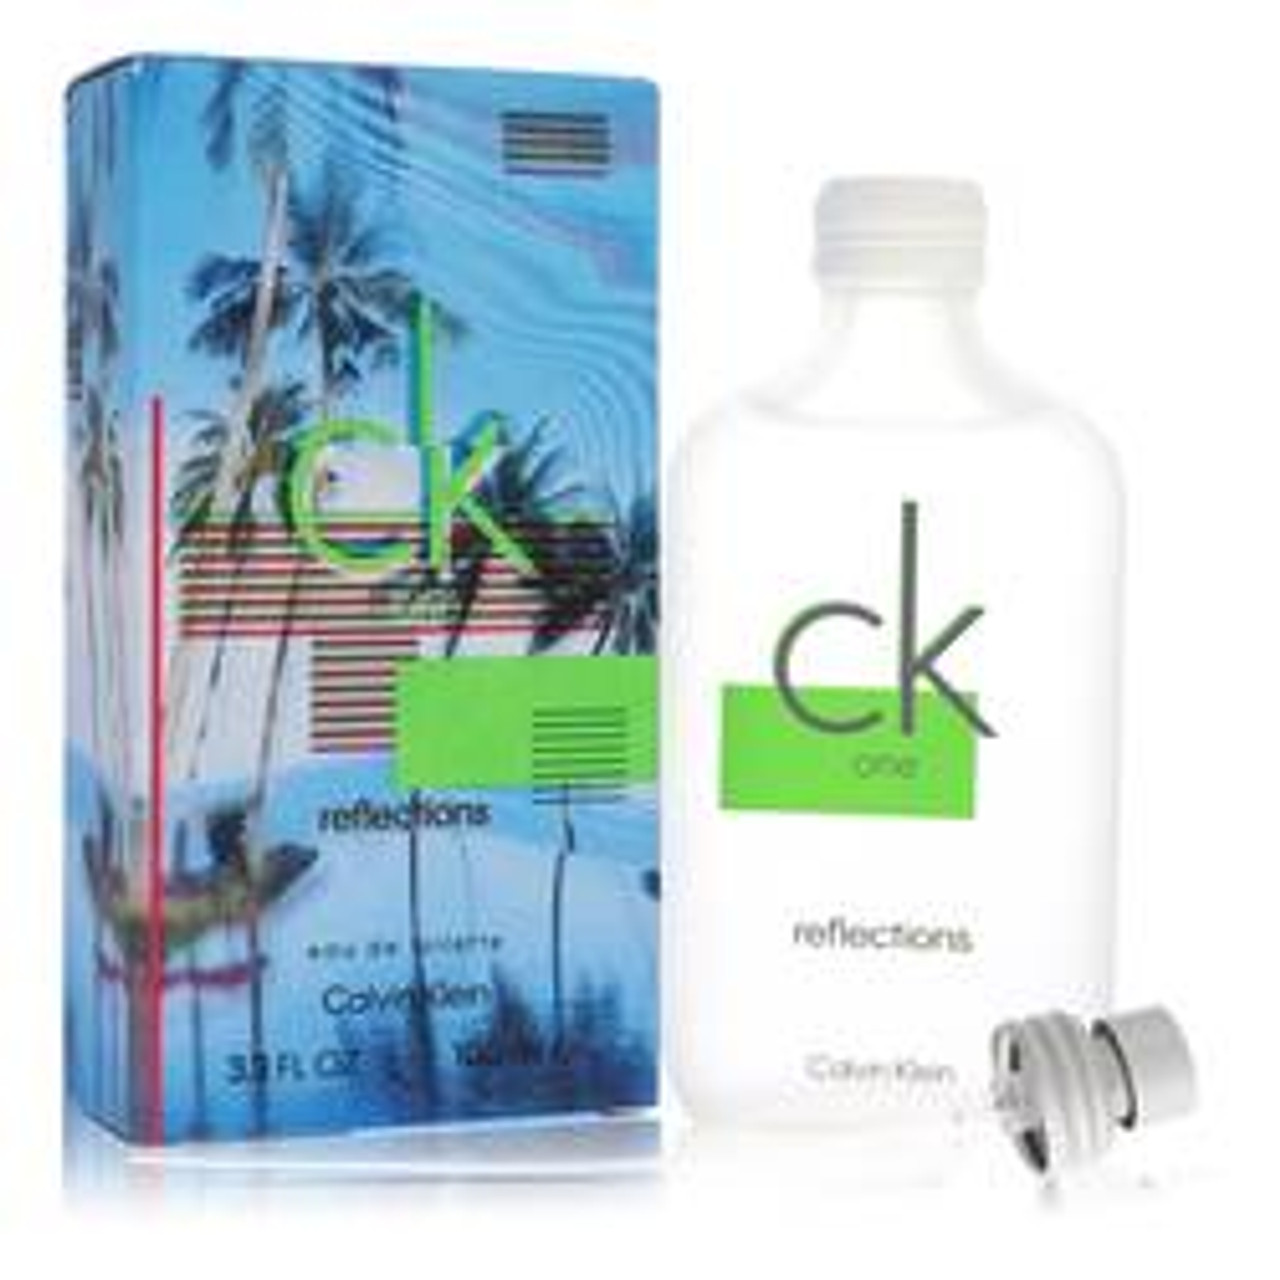 Ck One Reflections Cologne By Calvin Klein Eau De Toilette Spray (Unisex) 3.4 oz for Men - [From 112.00 - Choose pk Qty ] - *Ships from Miami